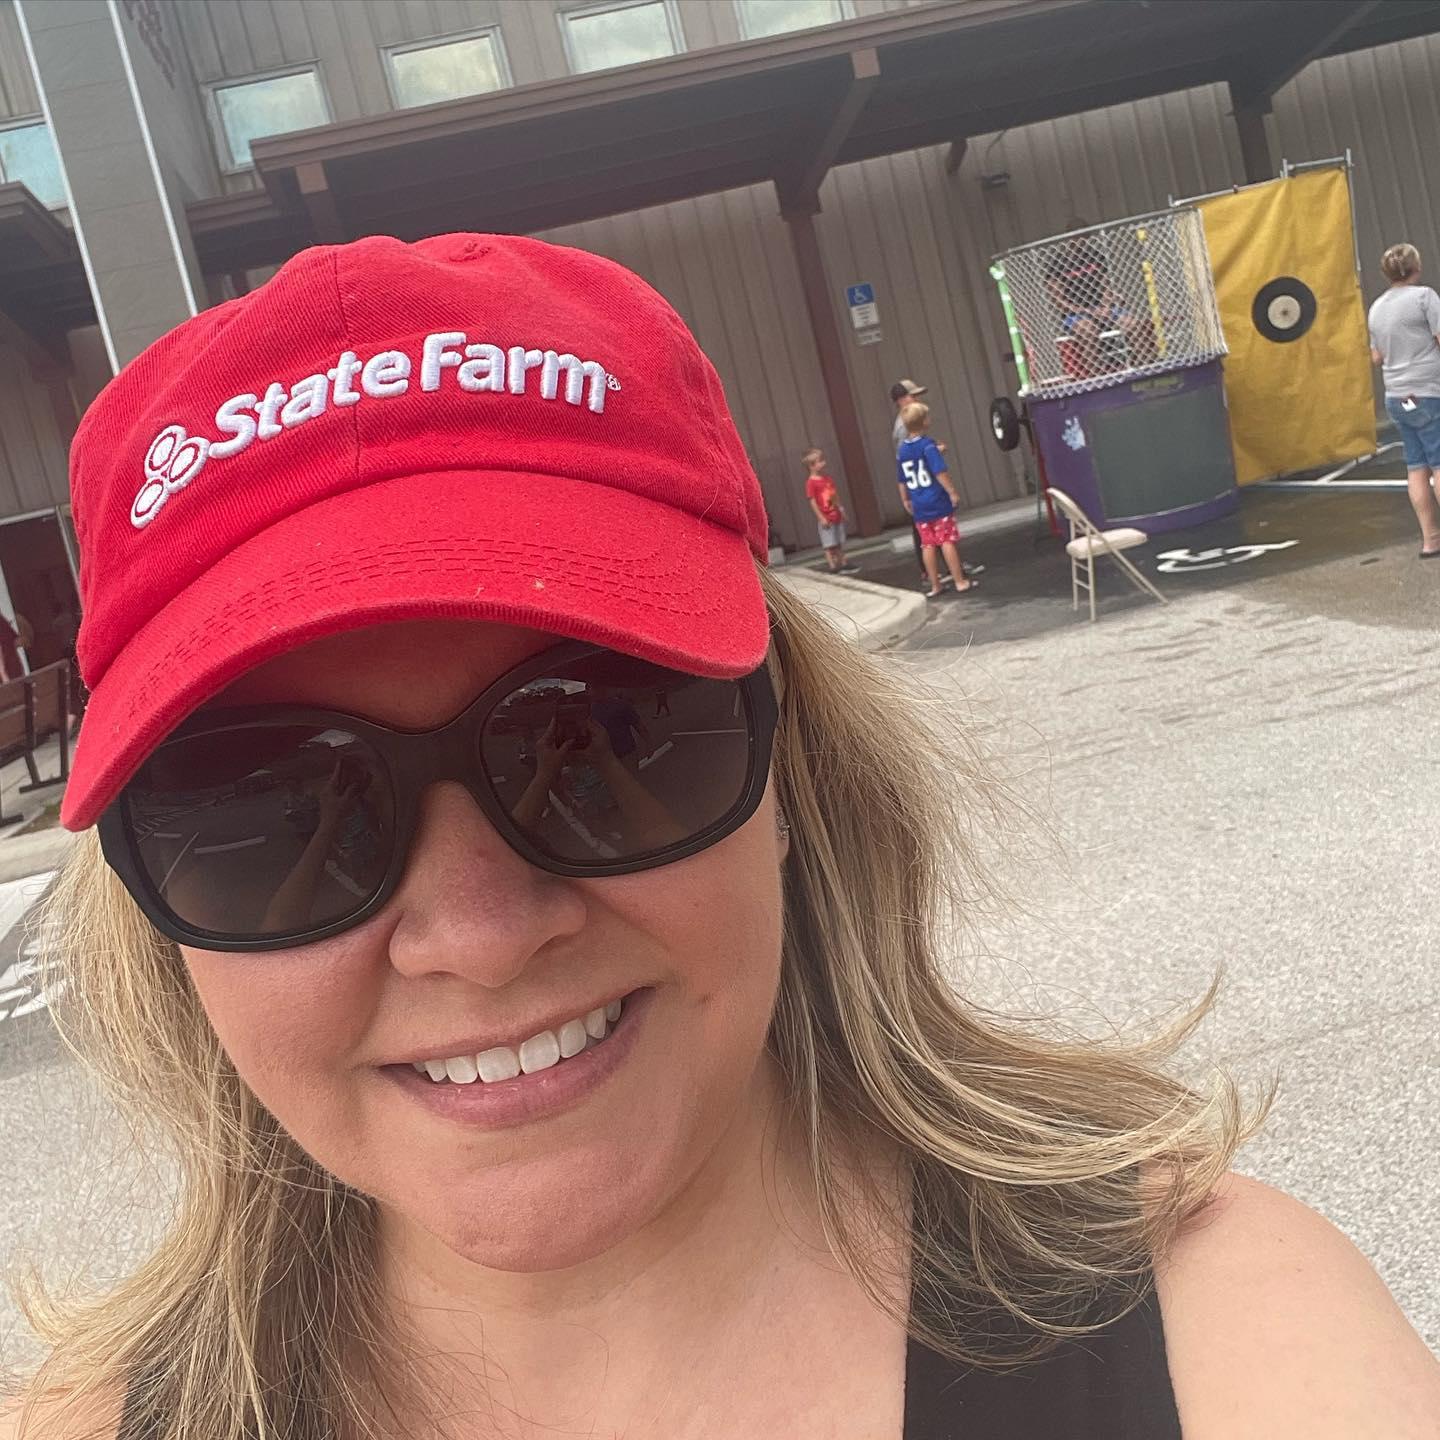 Rocking my State Farm hat and always ready to help with all your insurance needs!